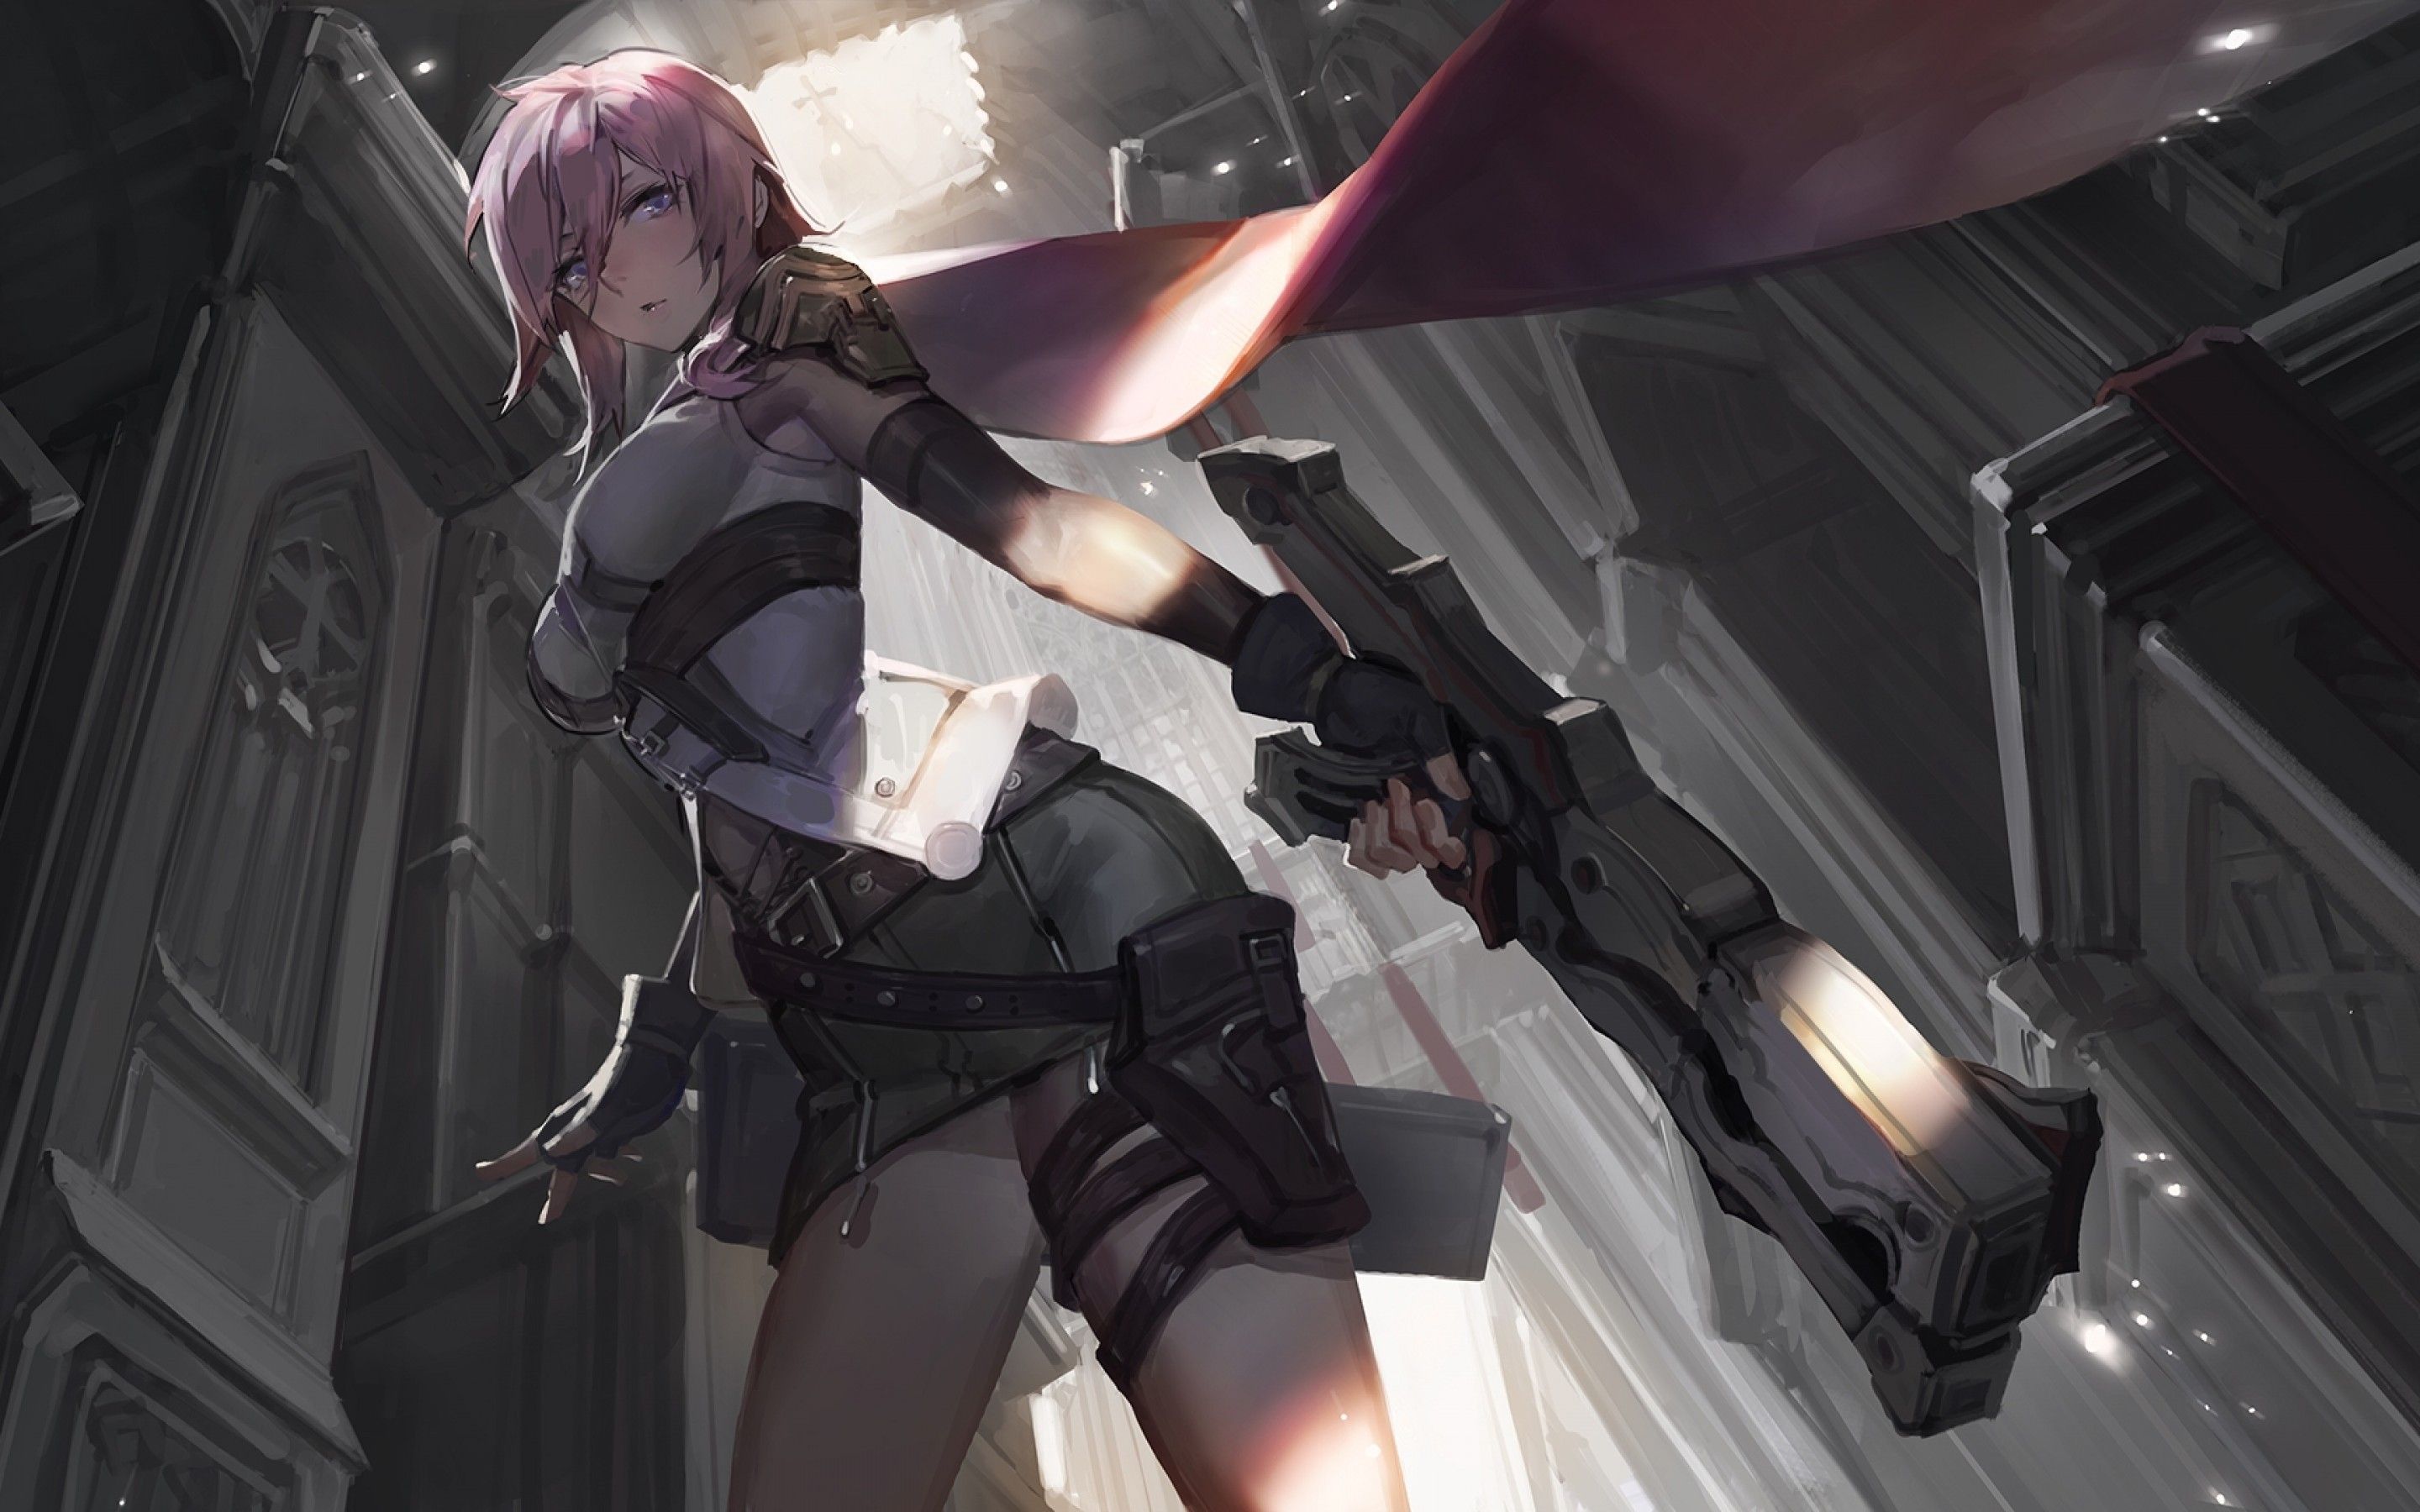 Download 2880x1800 Final Fantasy Xiii, Lightning, Claire Farron